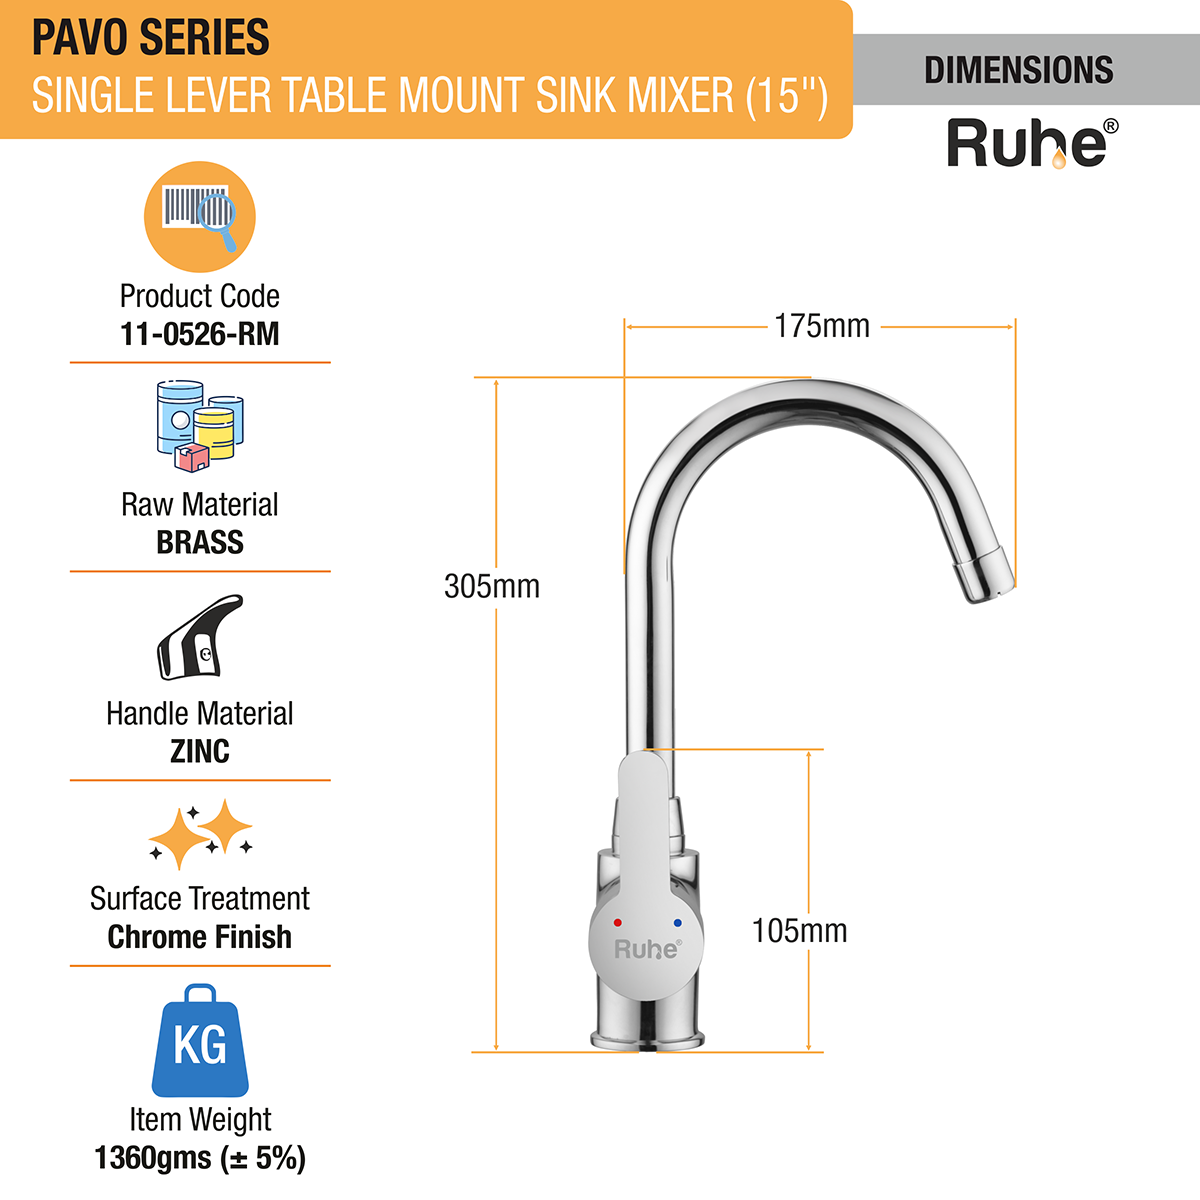 Pavo Single Lever Table-Mount Sink Mixer with Medium (15 Inches) Round Swivel Spout Brass Faucet dimensions and sizes